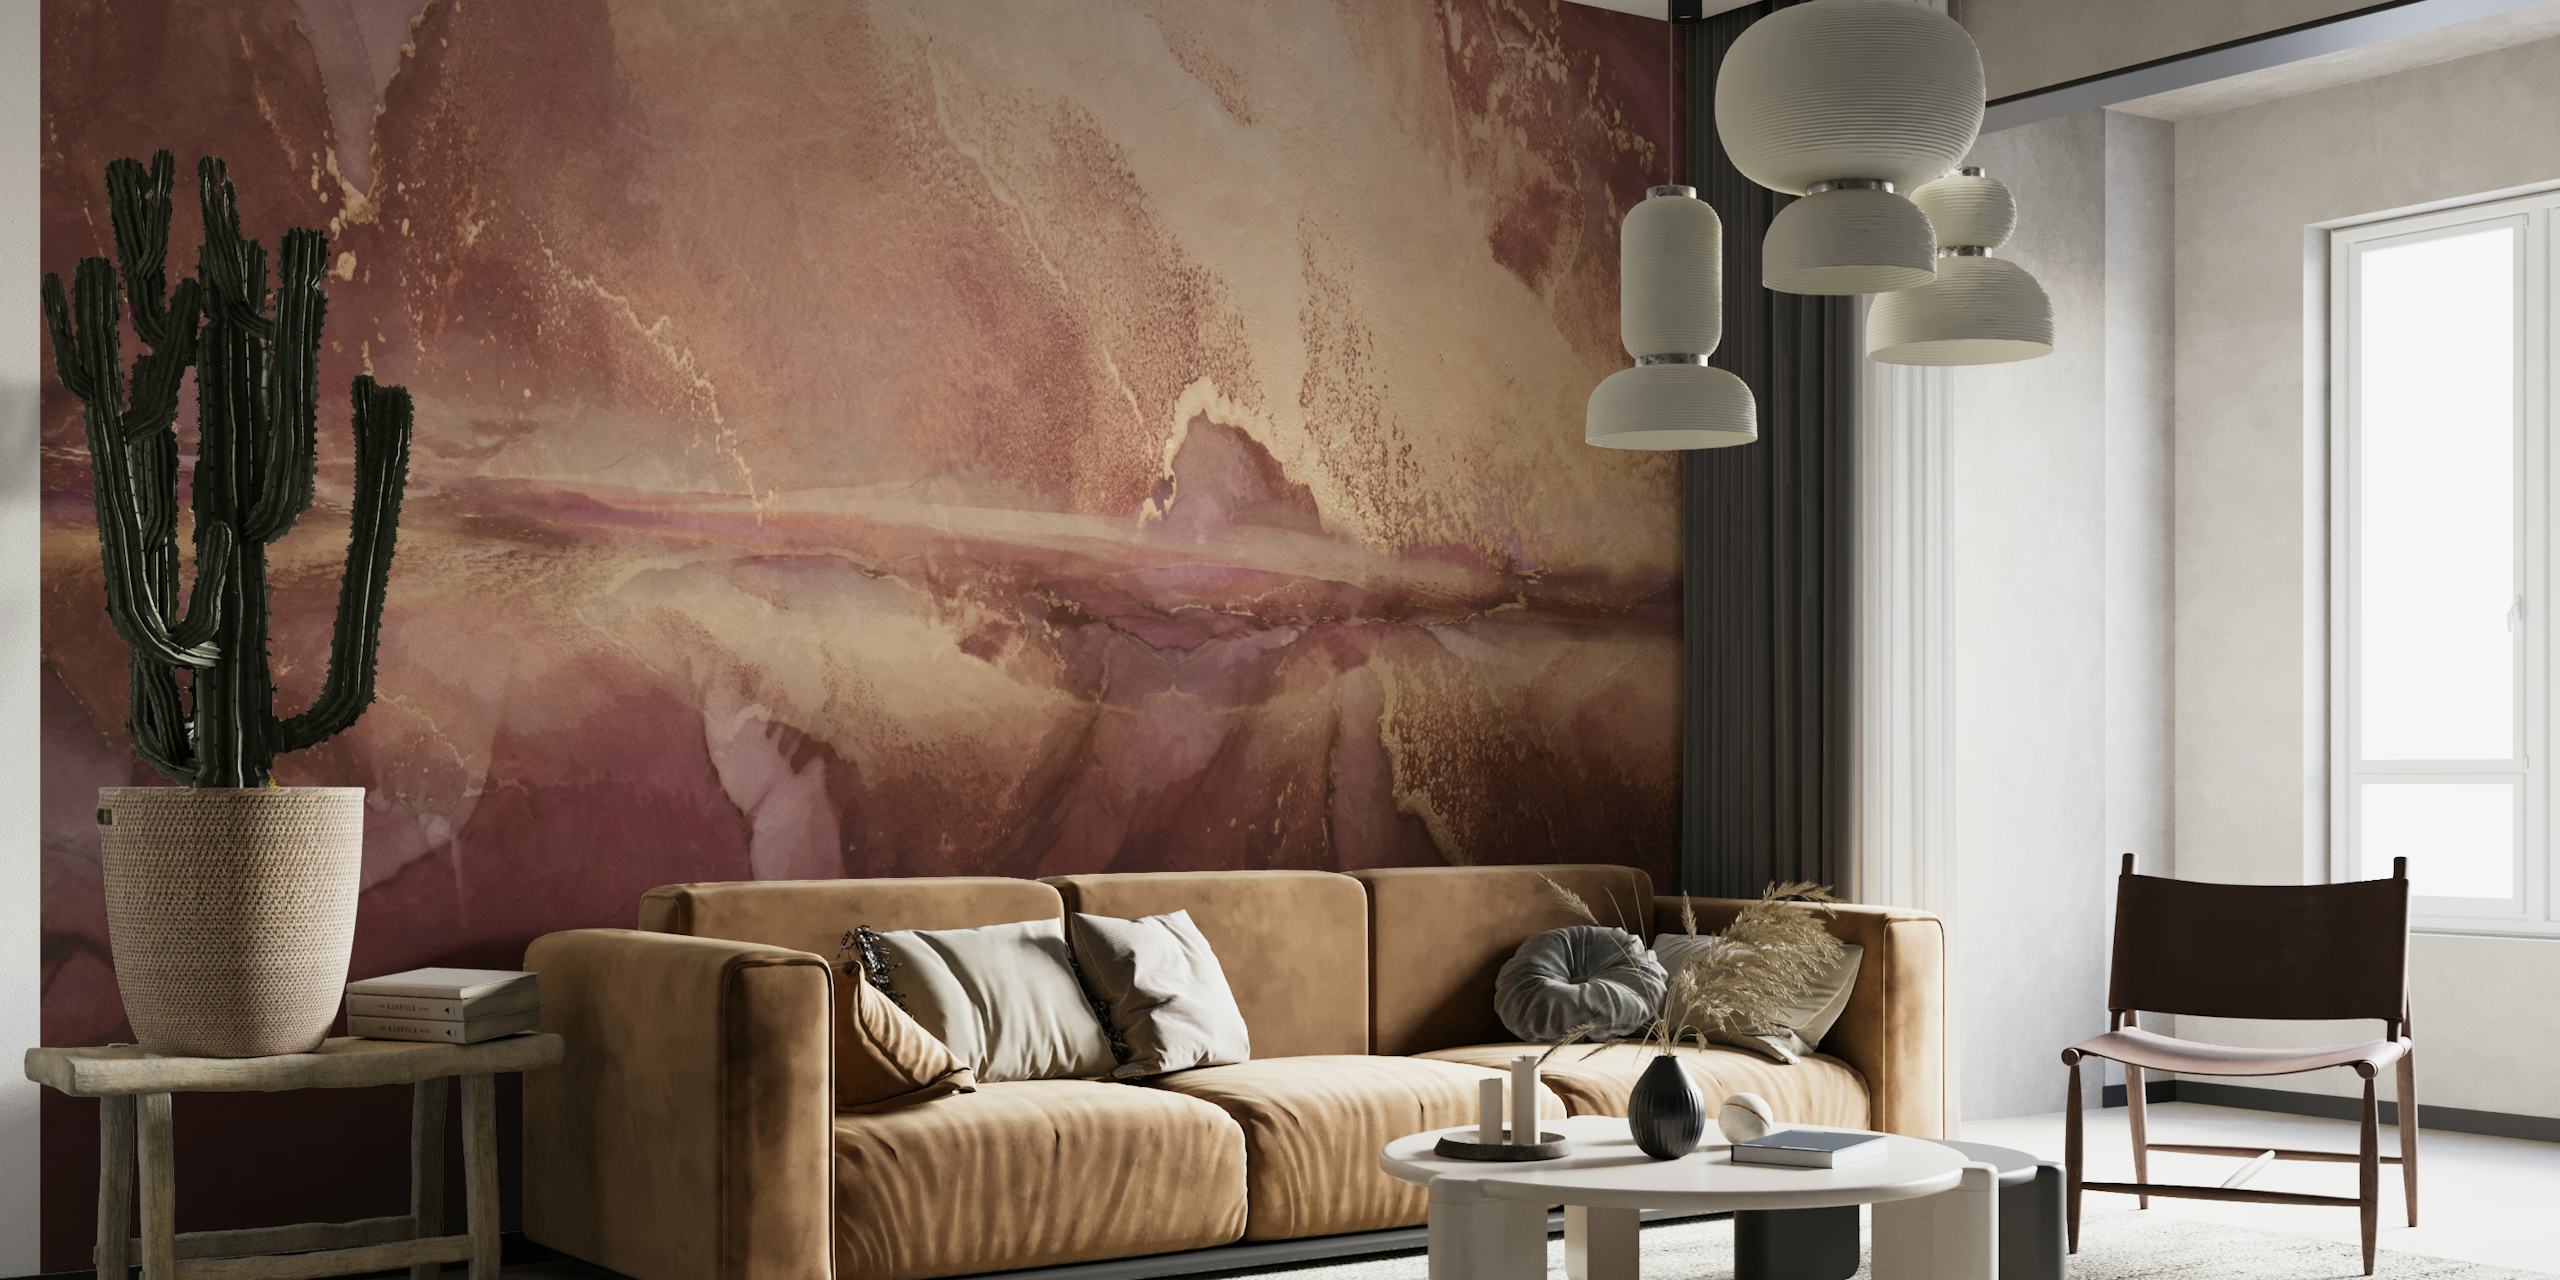 Abstract landscape wall mural with earth tones and reflective water imagery